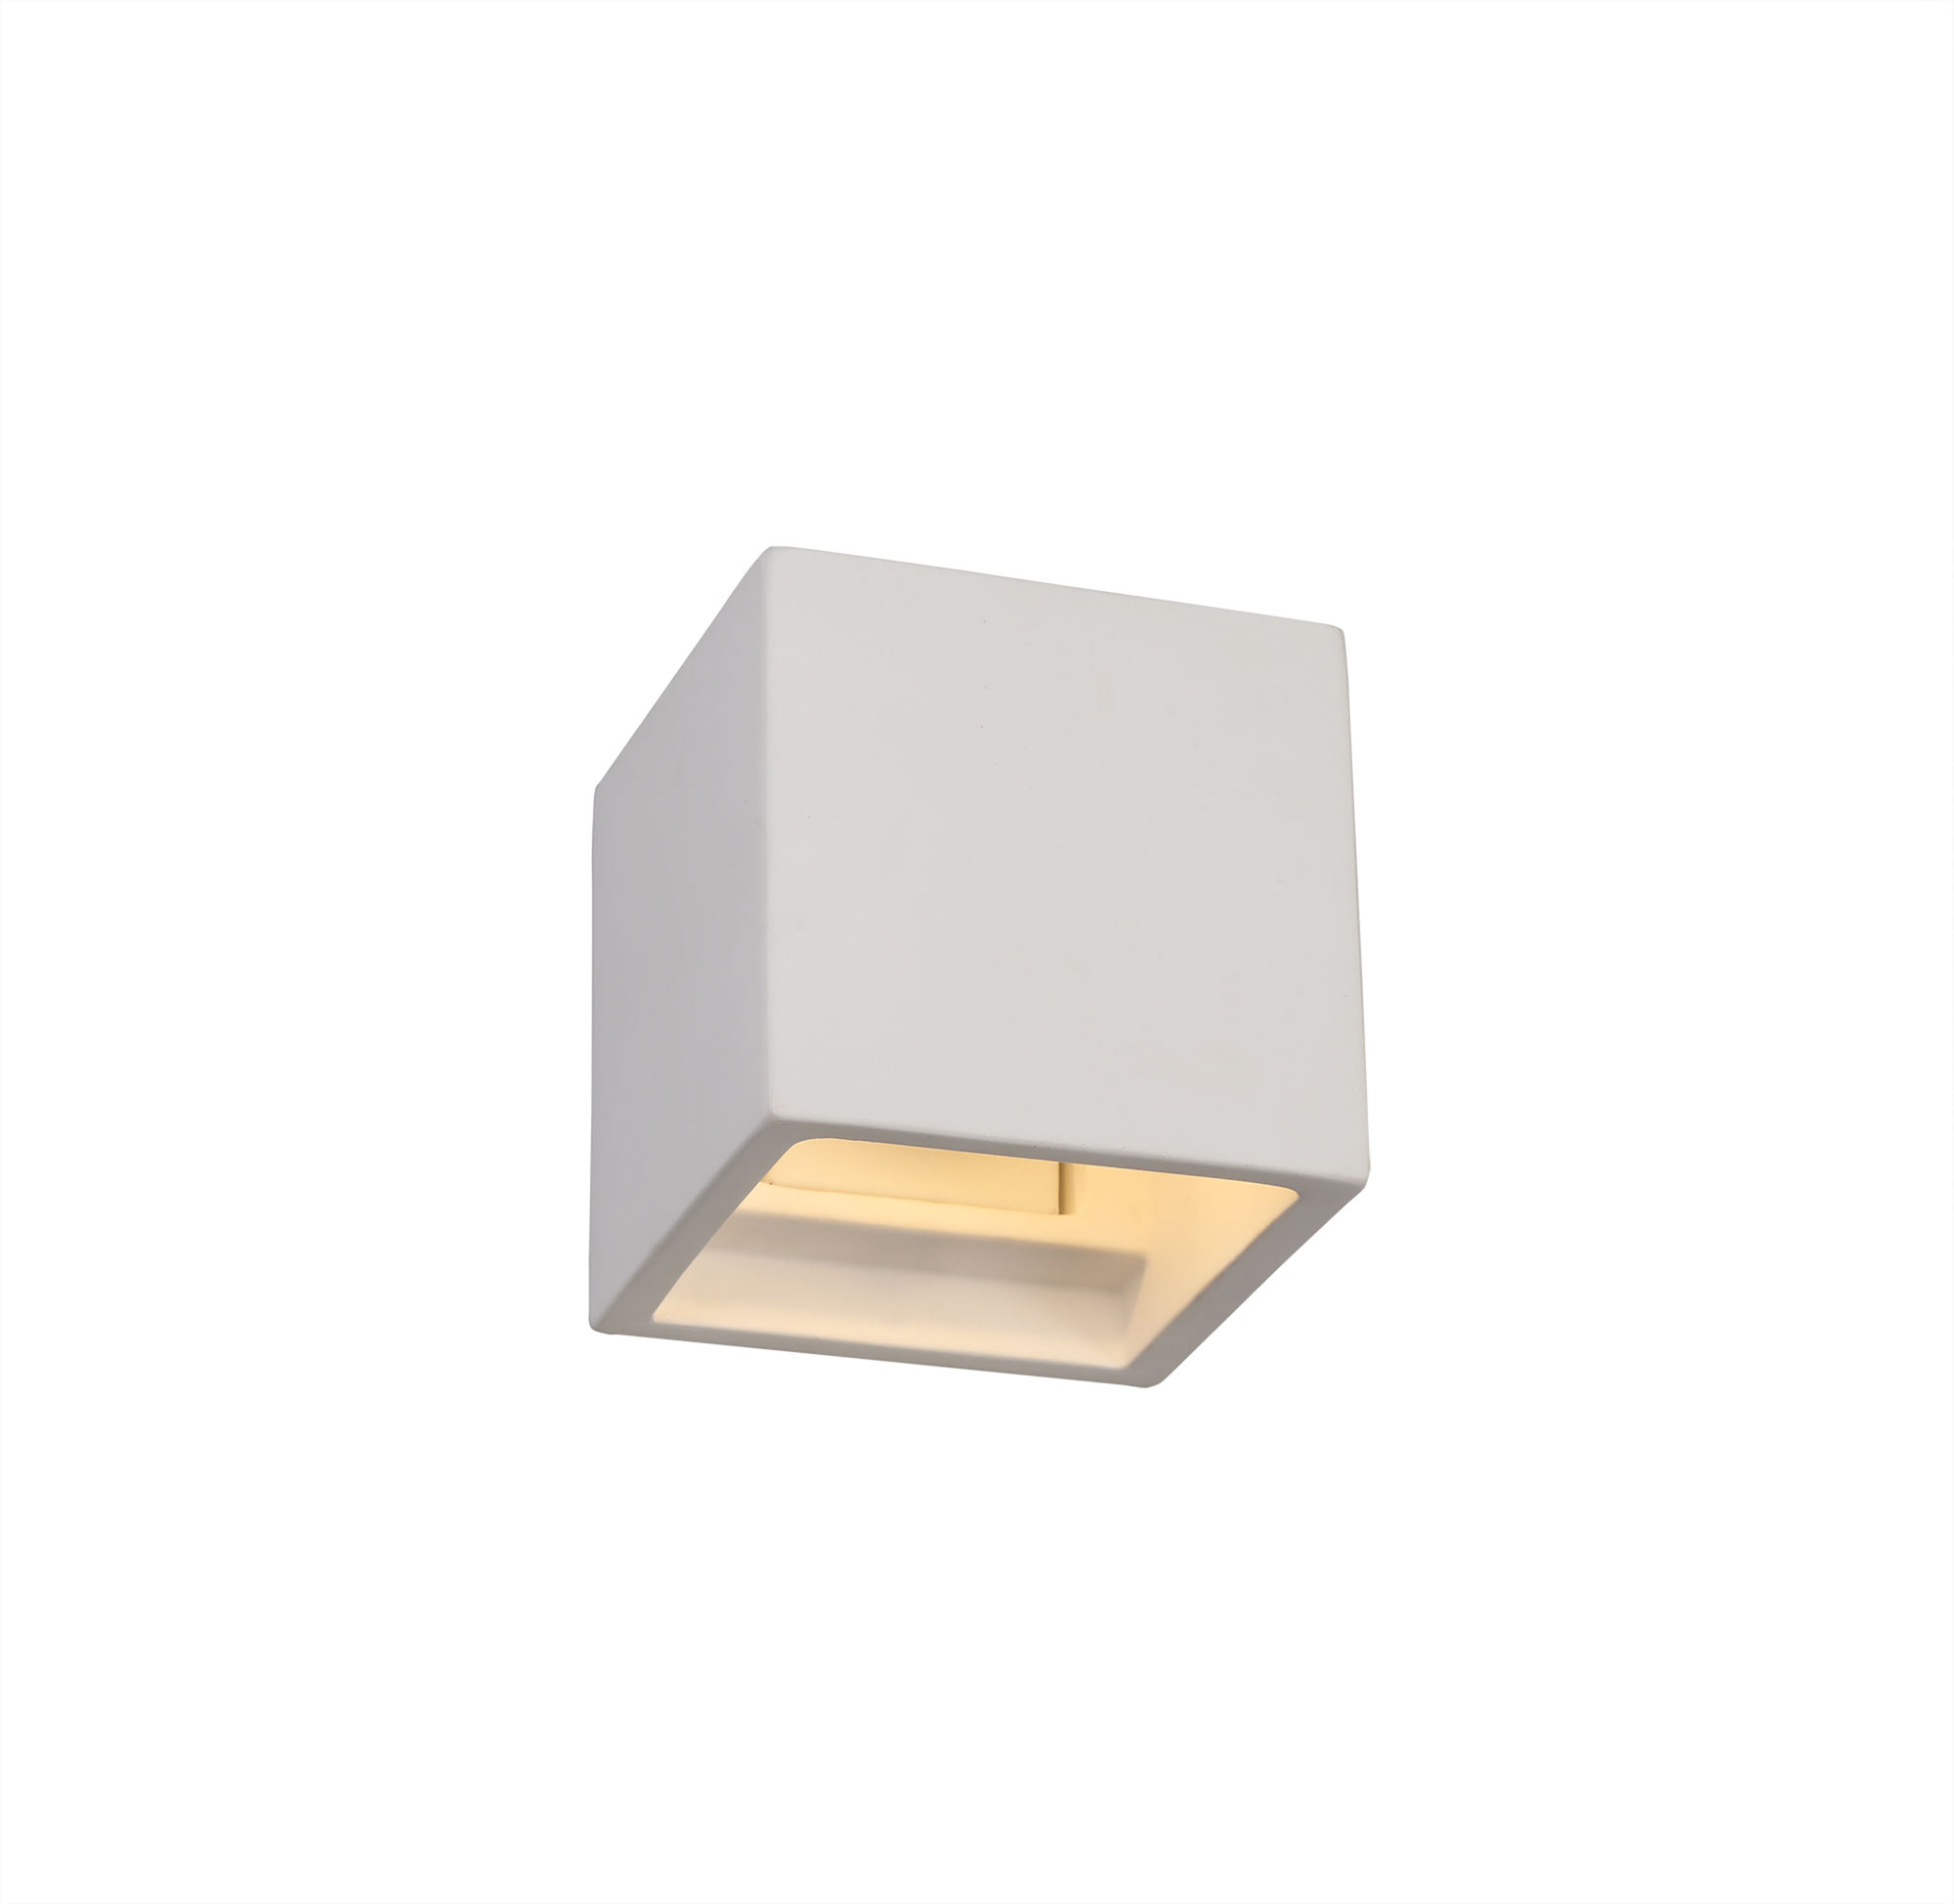 D0494  Alina Square Wall Lamp 1 Light White Paintable